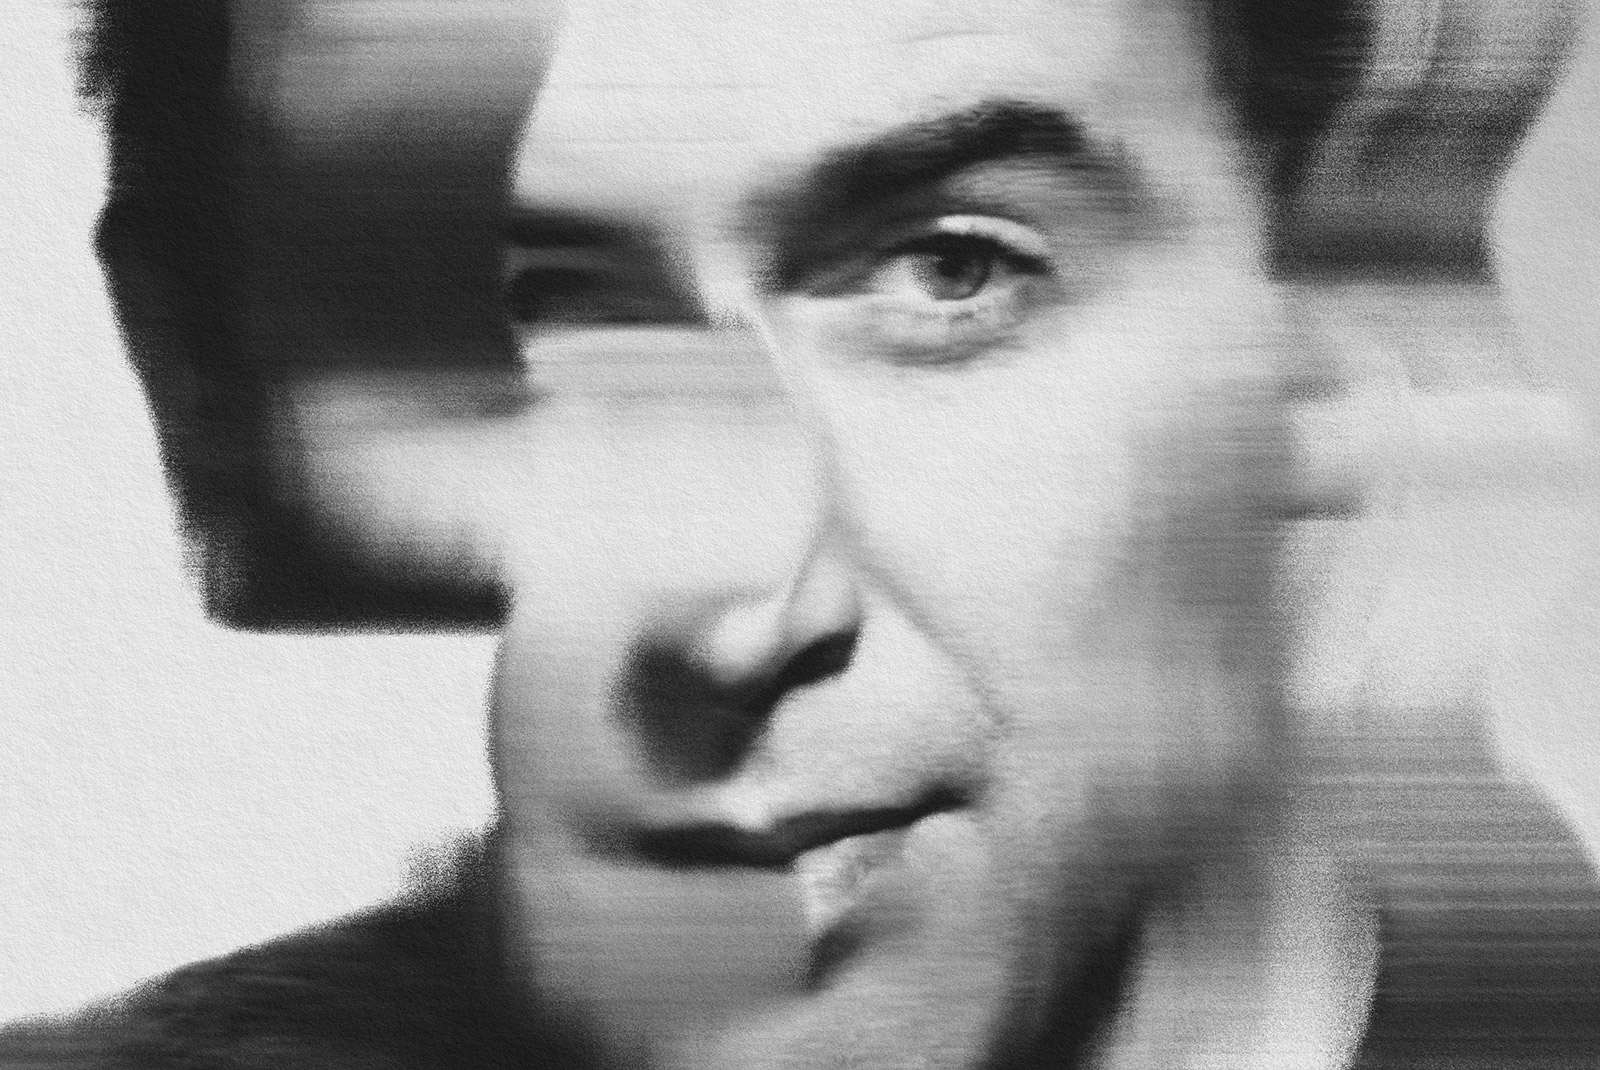 Black and white distorted portrait of a man for creative graphic design templates. Blurred and artistic effect for unique visuals.